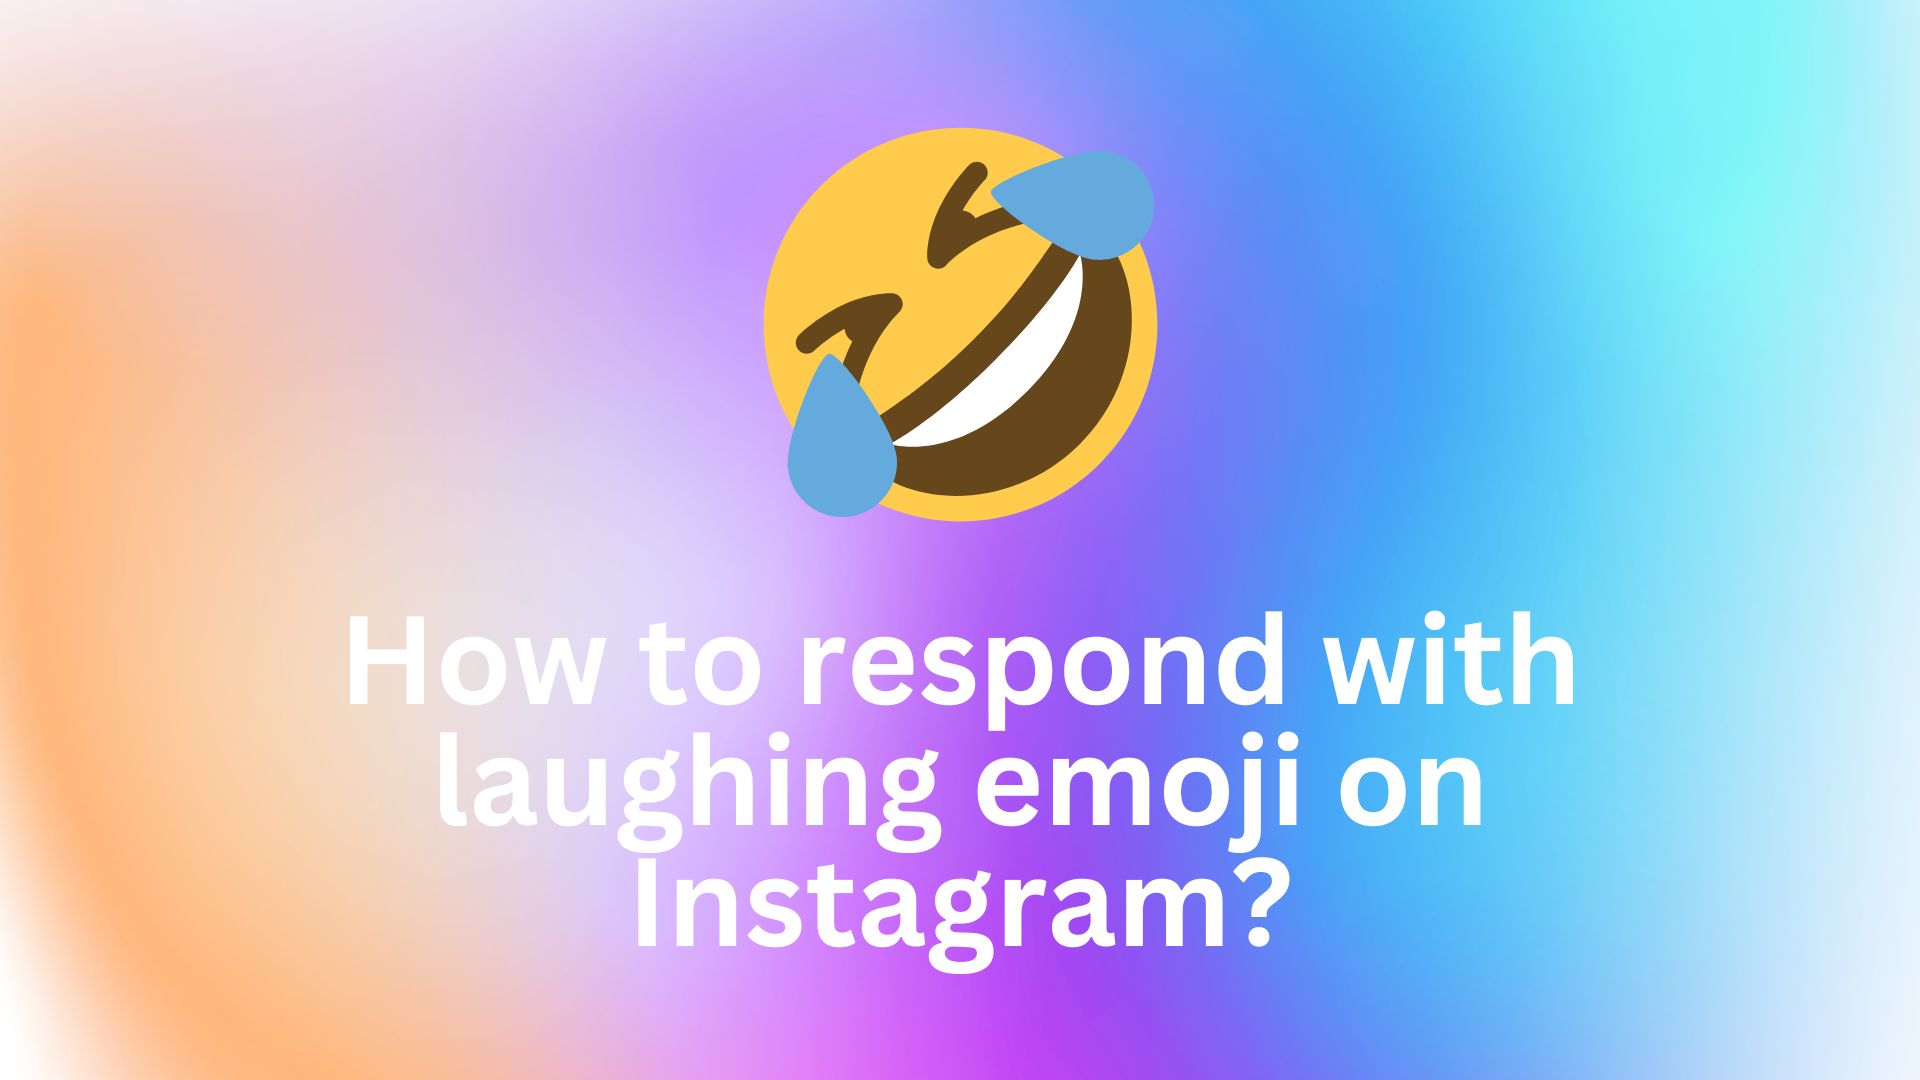 How to respond with laughing emoji on Instagram